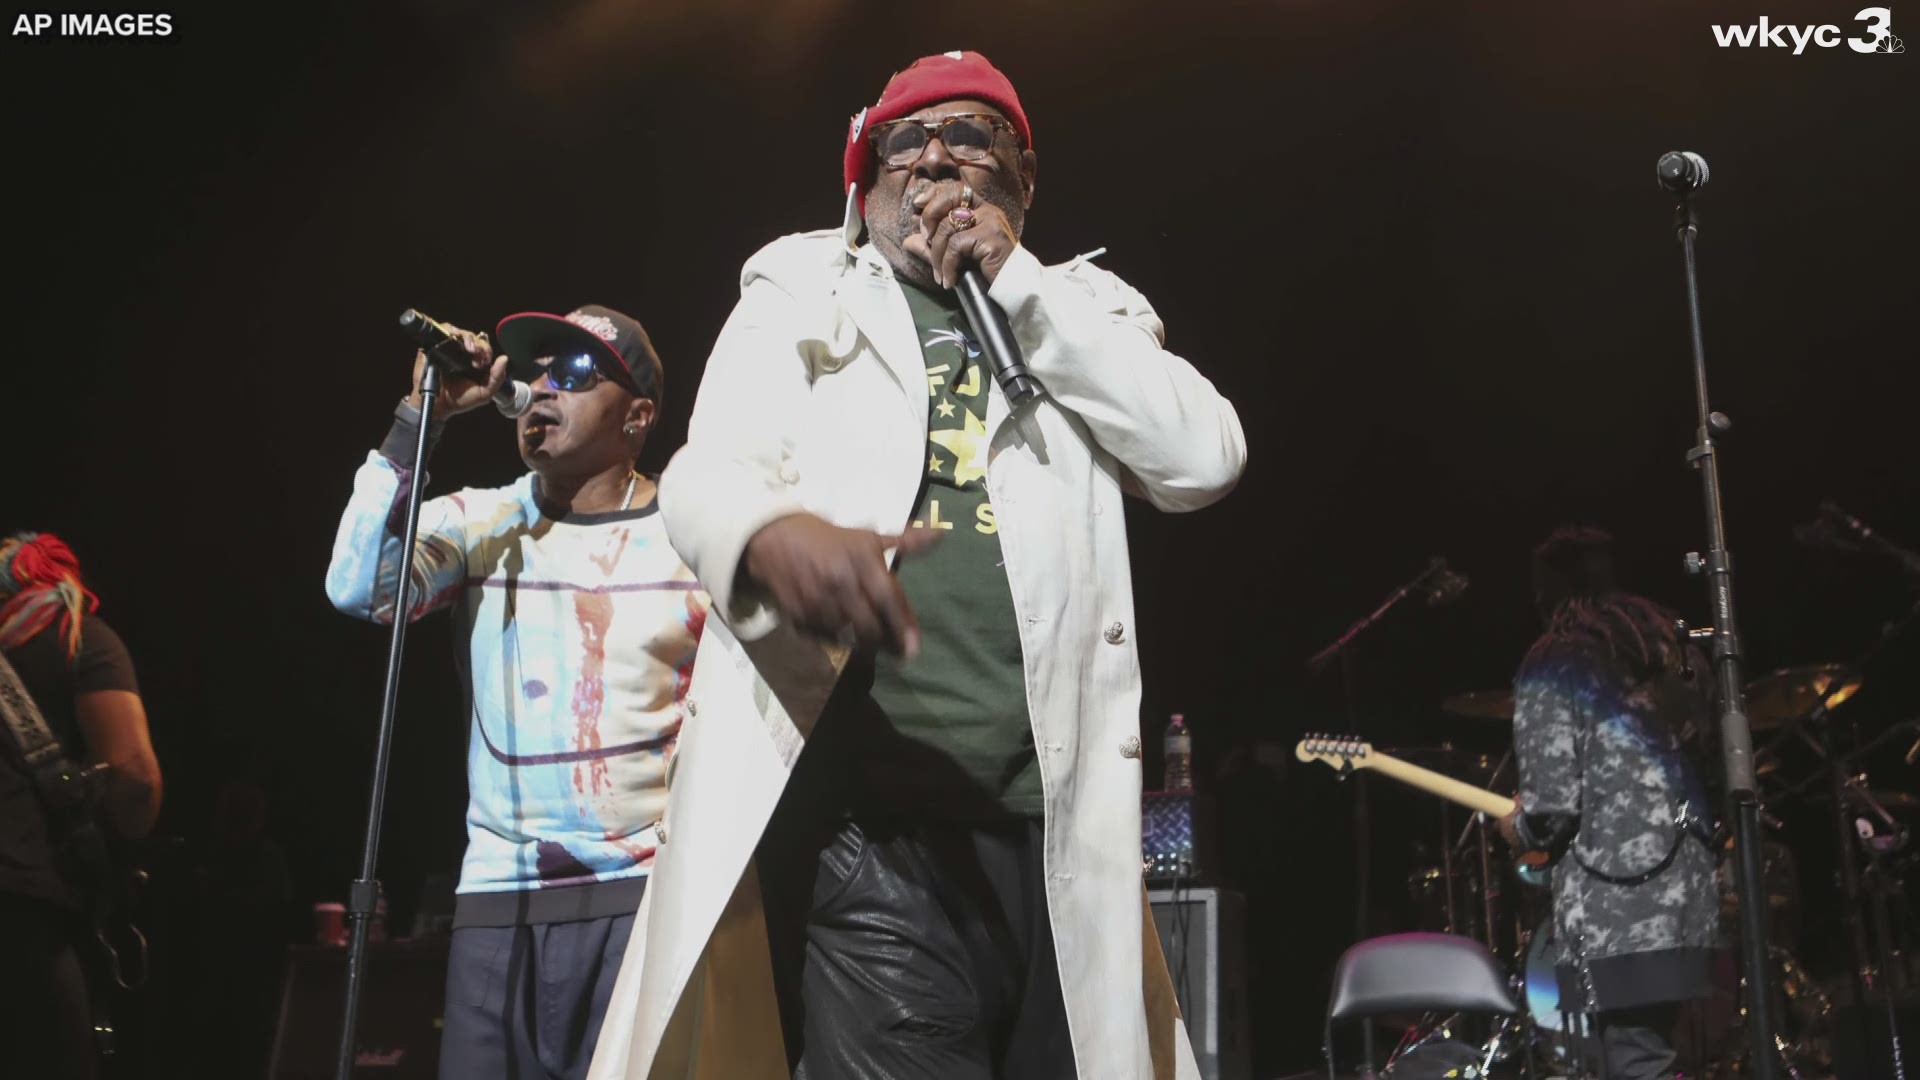 George Clinton and the Parliament Funkadelic will play a concert on the plaza of the Rock & Roll Hall of Fame Saturday.